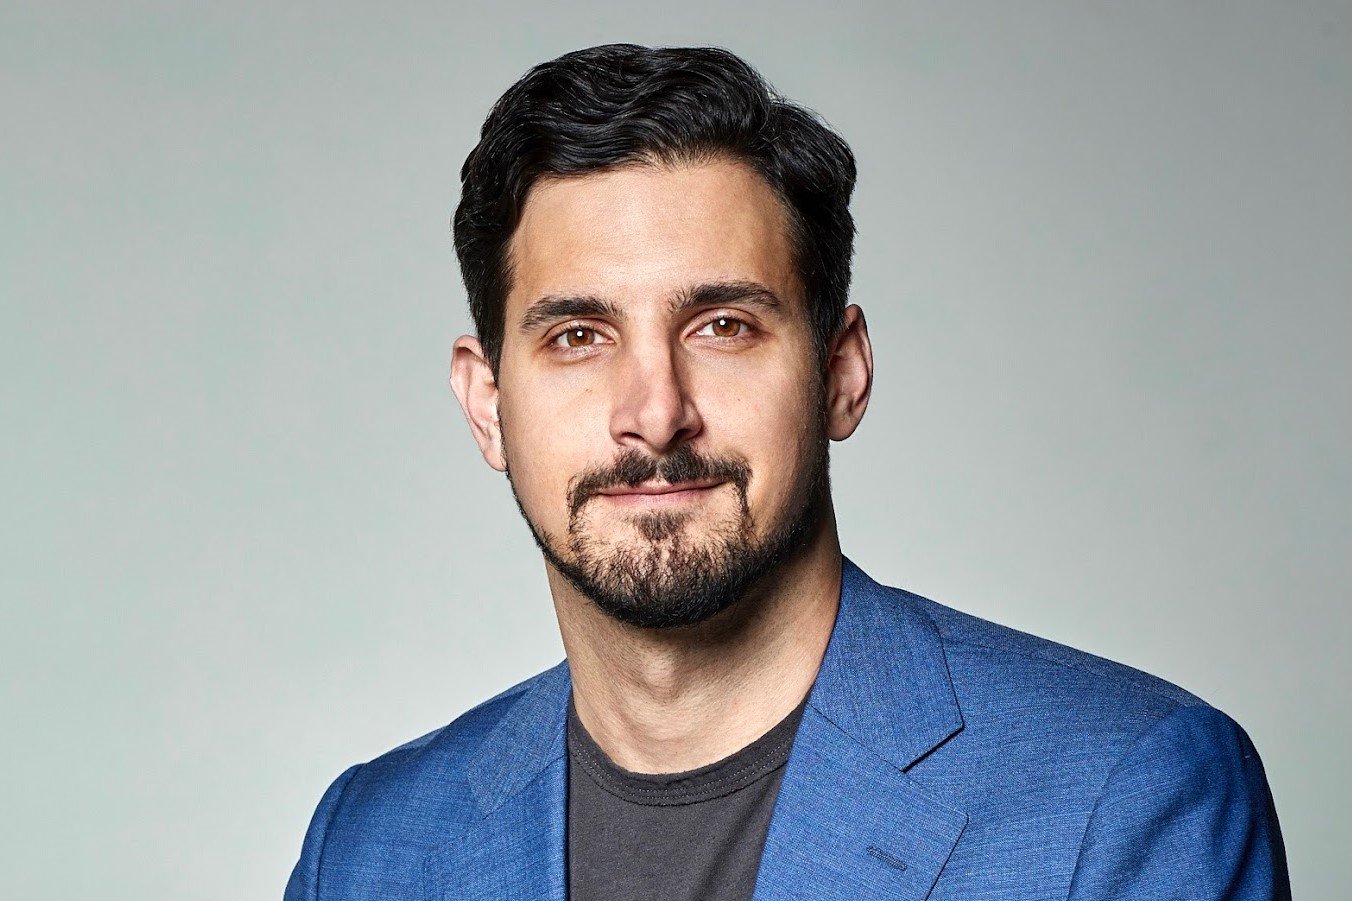 Paul Ricci Joins Buzzfeed Studios To Lead Unscripted Tv (TV News Roundup)